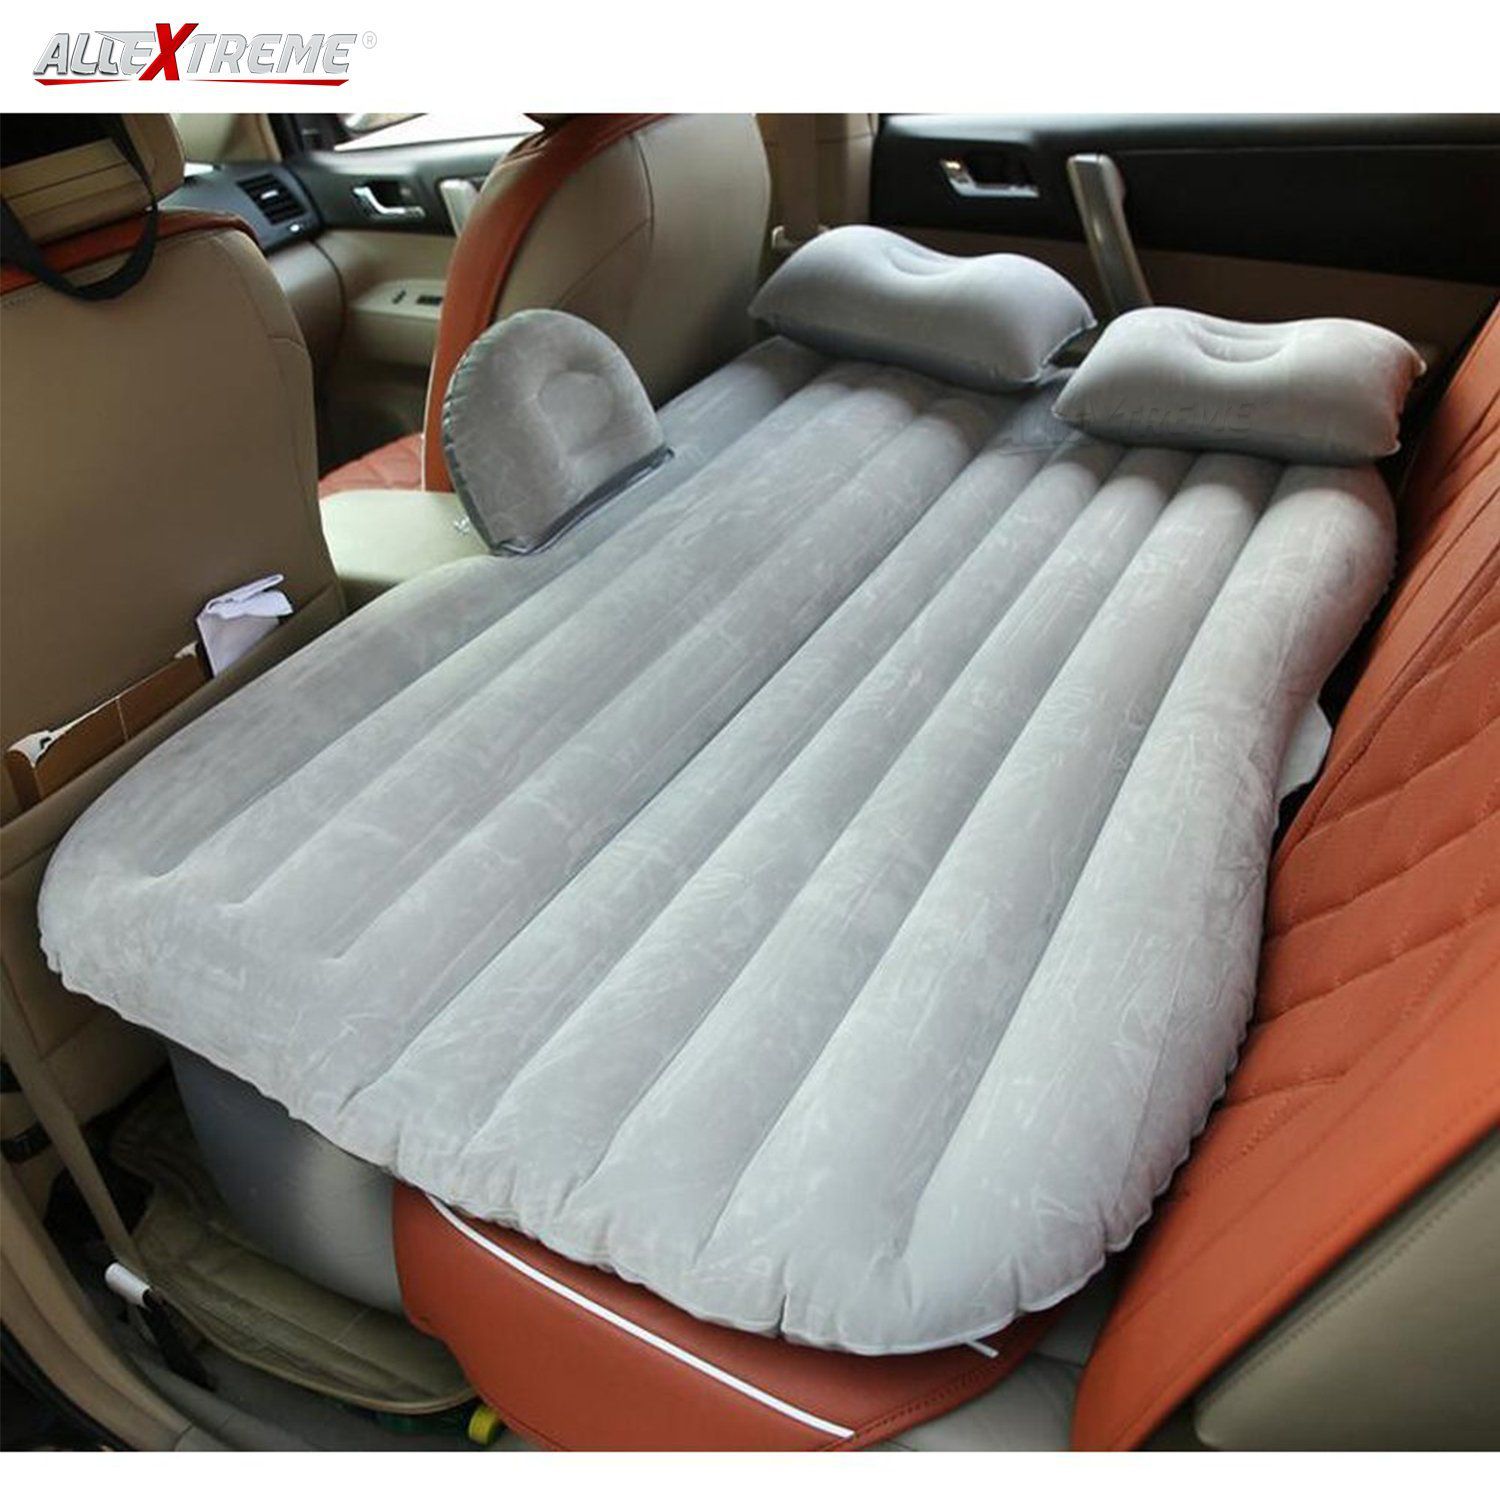 Allextreme Car Inflatable Bed Buy Allextreme Car Inflatable Bed Online